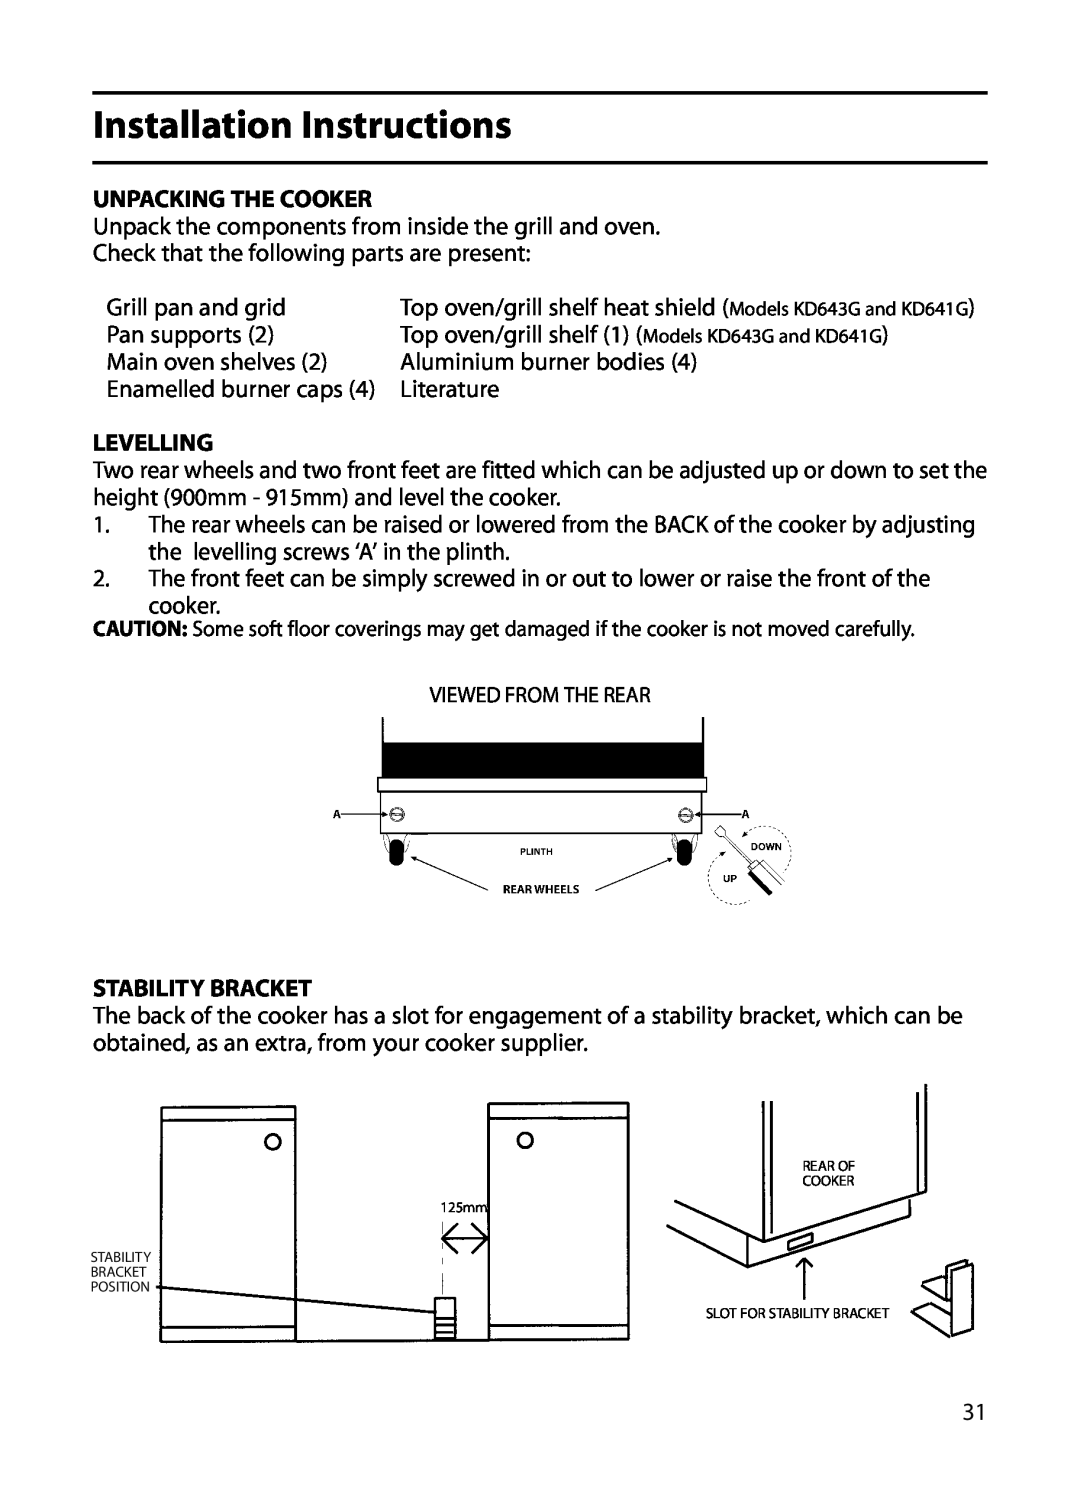 Indesit KD643G, KD641G, KD640G manual Installation Instructions, Unpacking The Cooker, Levelling, Stability Bracket 